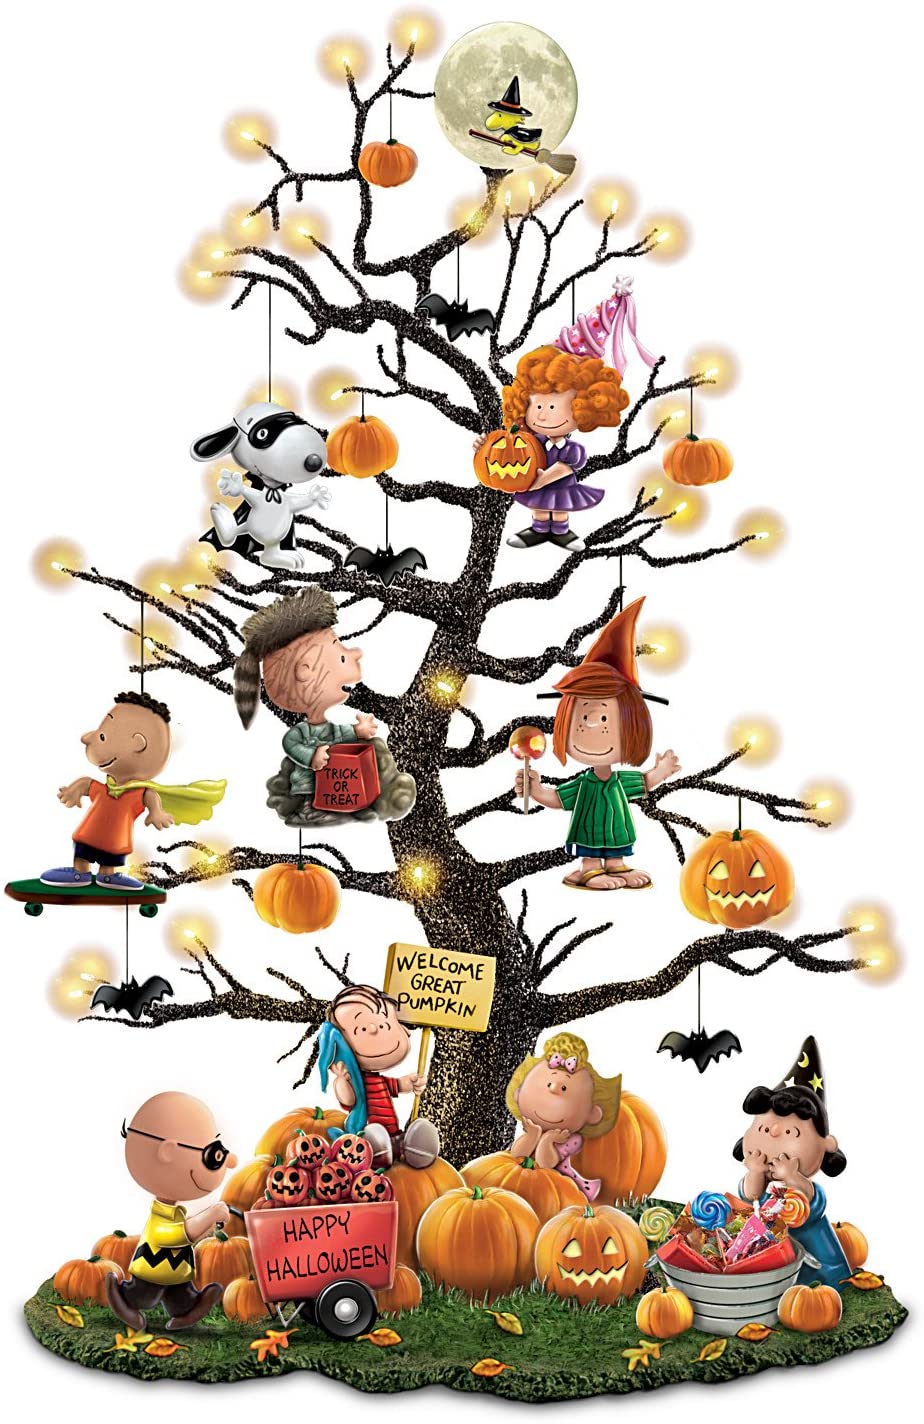 1 The Bradford Exchange Peanuts It's The Great Pumpkin Illuminated Halloween Tabletop Tree with Lights